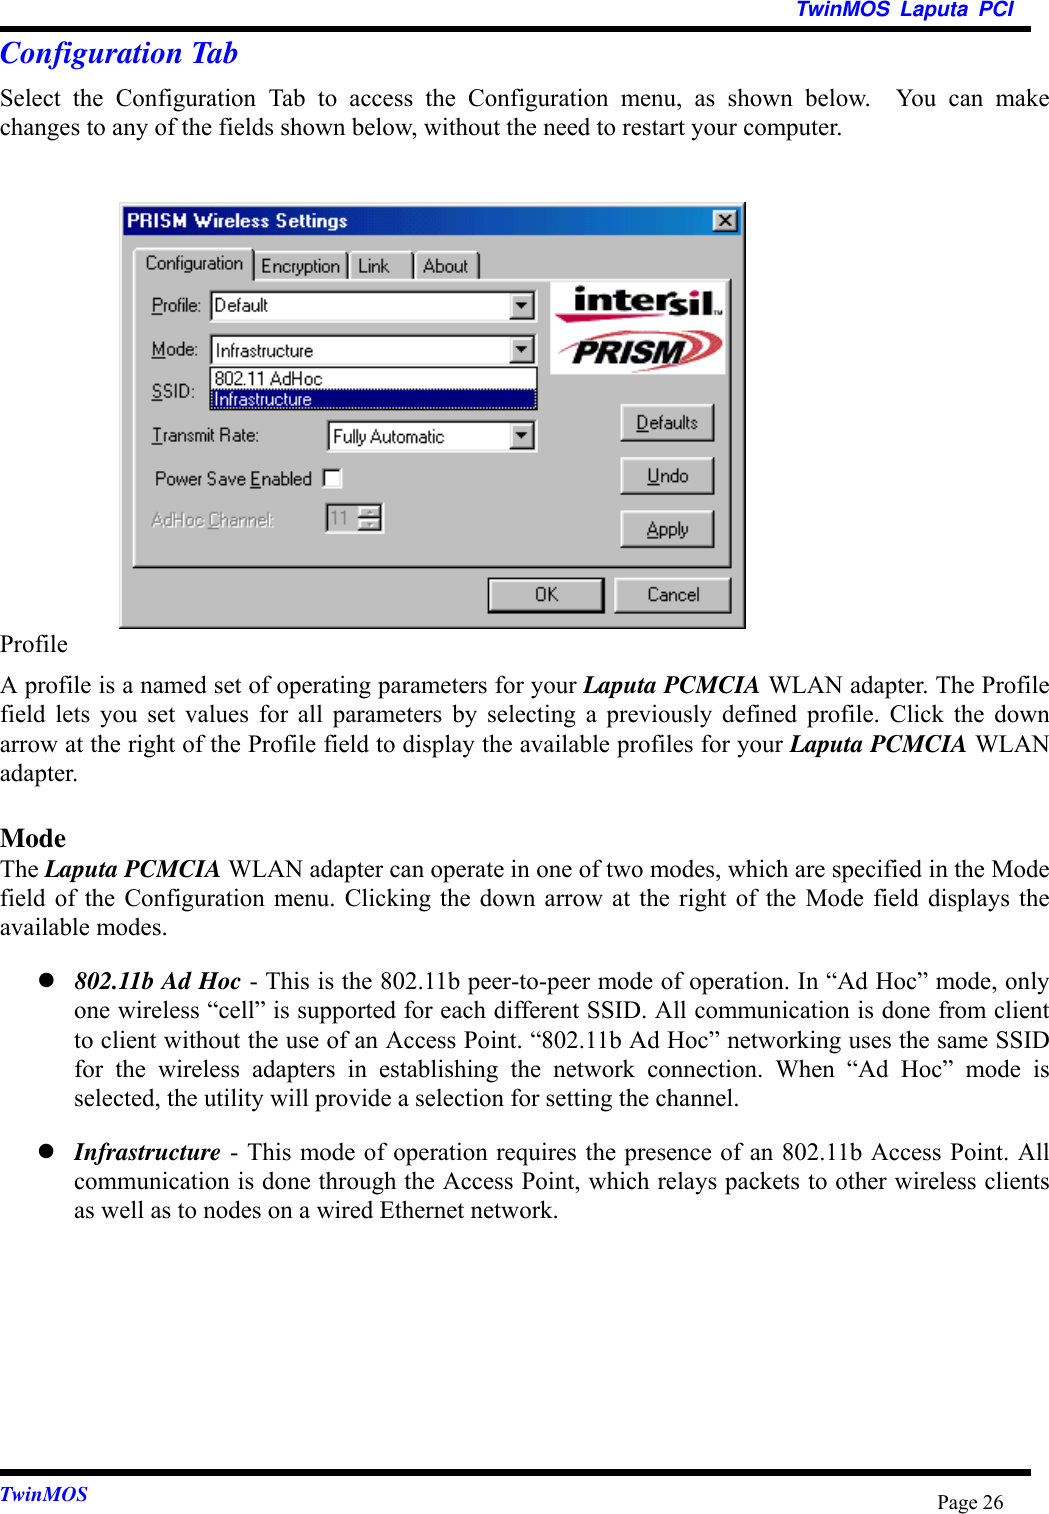 TwinMOS Laputa PCITwinMOS Page 26Configuration TabSelect the Configuration Tab to access the Configuration menu, as shown below.  You can makechanges to any of the fields shown below, without the need to restart your computer.ProfileA profile is a named set of operating parameters for your Laputa PCMCIA WLAN adapter. The Profilefield lets you set values for all parameters by selecting a previously defined profile. Click the downarrow at the right of the Profile field to display the available profiles for your Laputa PCMCIA WLANadapter.ModeThe Laputa PCMCIA WLAN adapter can operate in one of two modes, which are specified in the Modefield of the Configuration menu. Clicking the down arrow at the right of the Mode field displays theavailable modes.z 802.11b Ad Hoc - This is the 802.11b peer-to-peer mode of operation. In “Ad Hoc” mode, onlyone wireless “cell” is supported for each different SSID. All communication is done from clientto client without the use of an Access Point. “802.11b Ad Hoc” networking uses the same SSIDfor the wireless adapters in establishing the network connection. When “Ad Hoc” mode isselected, the utility will provide a selection for setting the channel.z Infrastructure - This mode of operation requires the presence of an 802.11b Access Point. Allcommunication is done through the Access Point, which relays packets to other wireless clientsas well as to nodes on a wired Ethernet network.